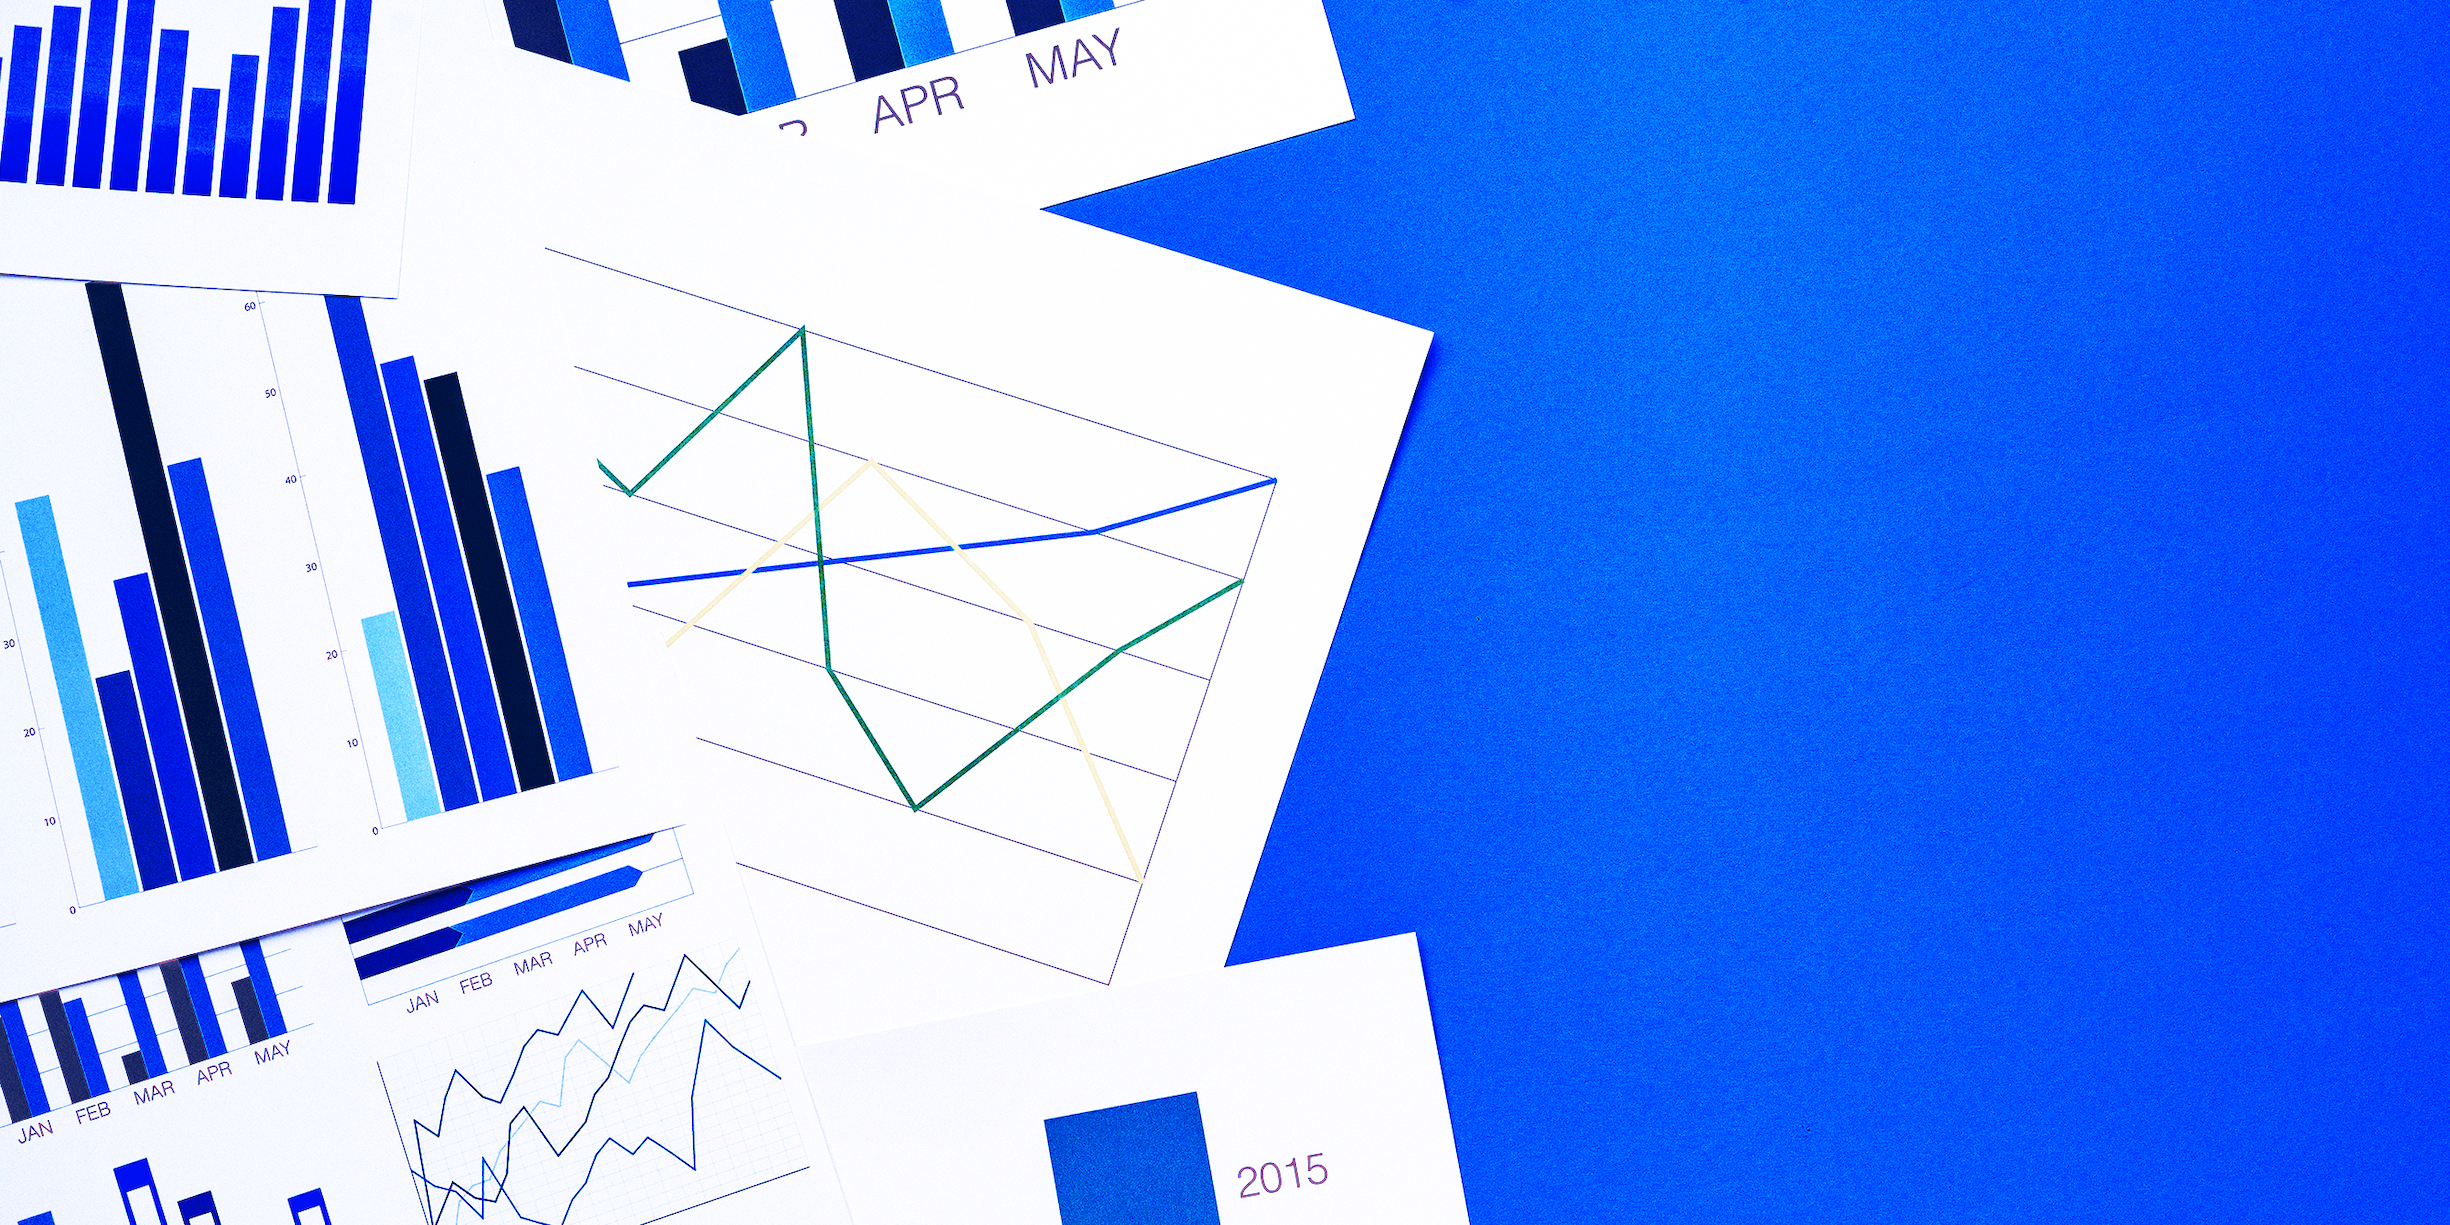 a stack of papers with graphs and charts on a blue background. The text on the papers is "APR", "MAY", "JAN FEB MAR APR MAY", and "2015".